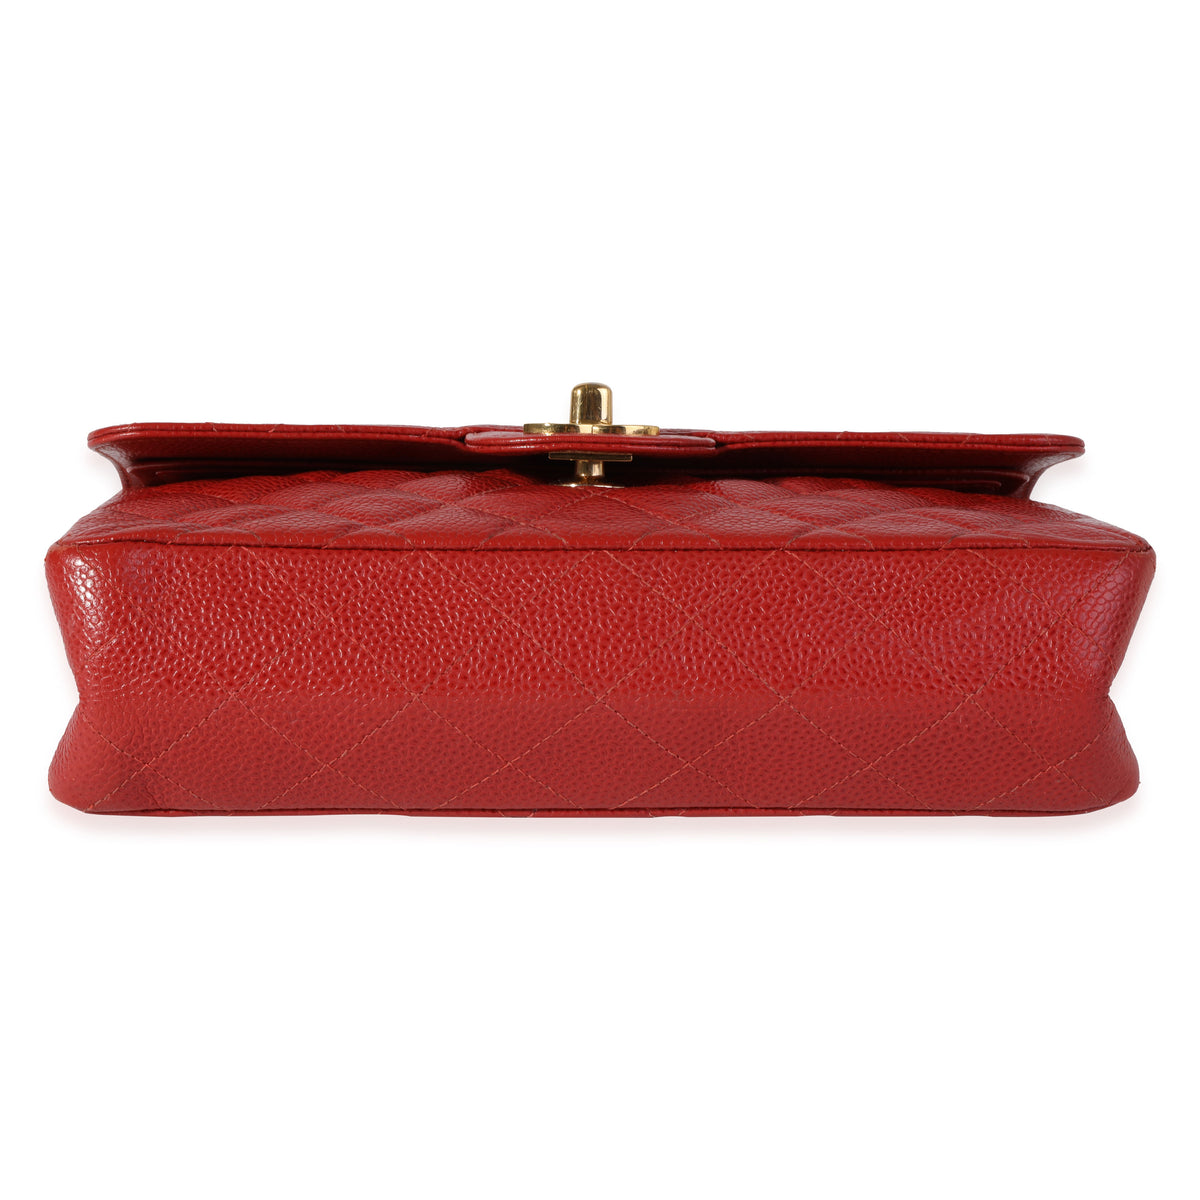 Chanel Red Quilted Caviar Small Classic Double Flap Bag